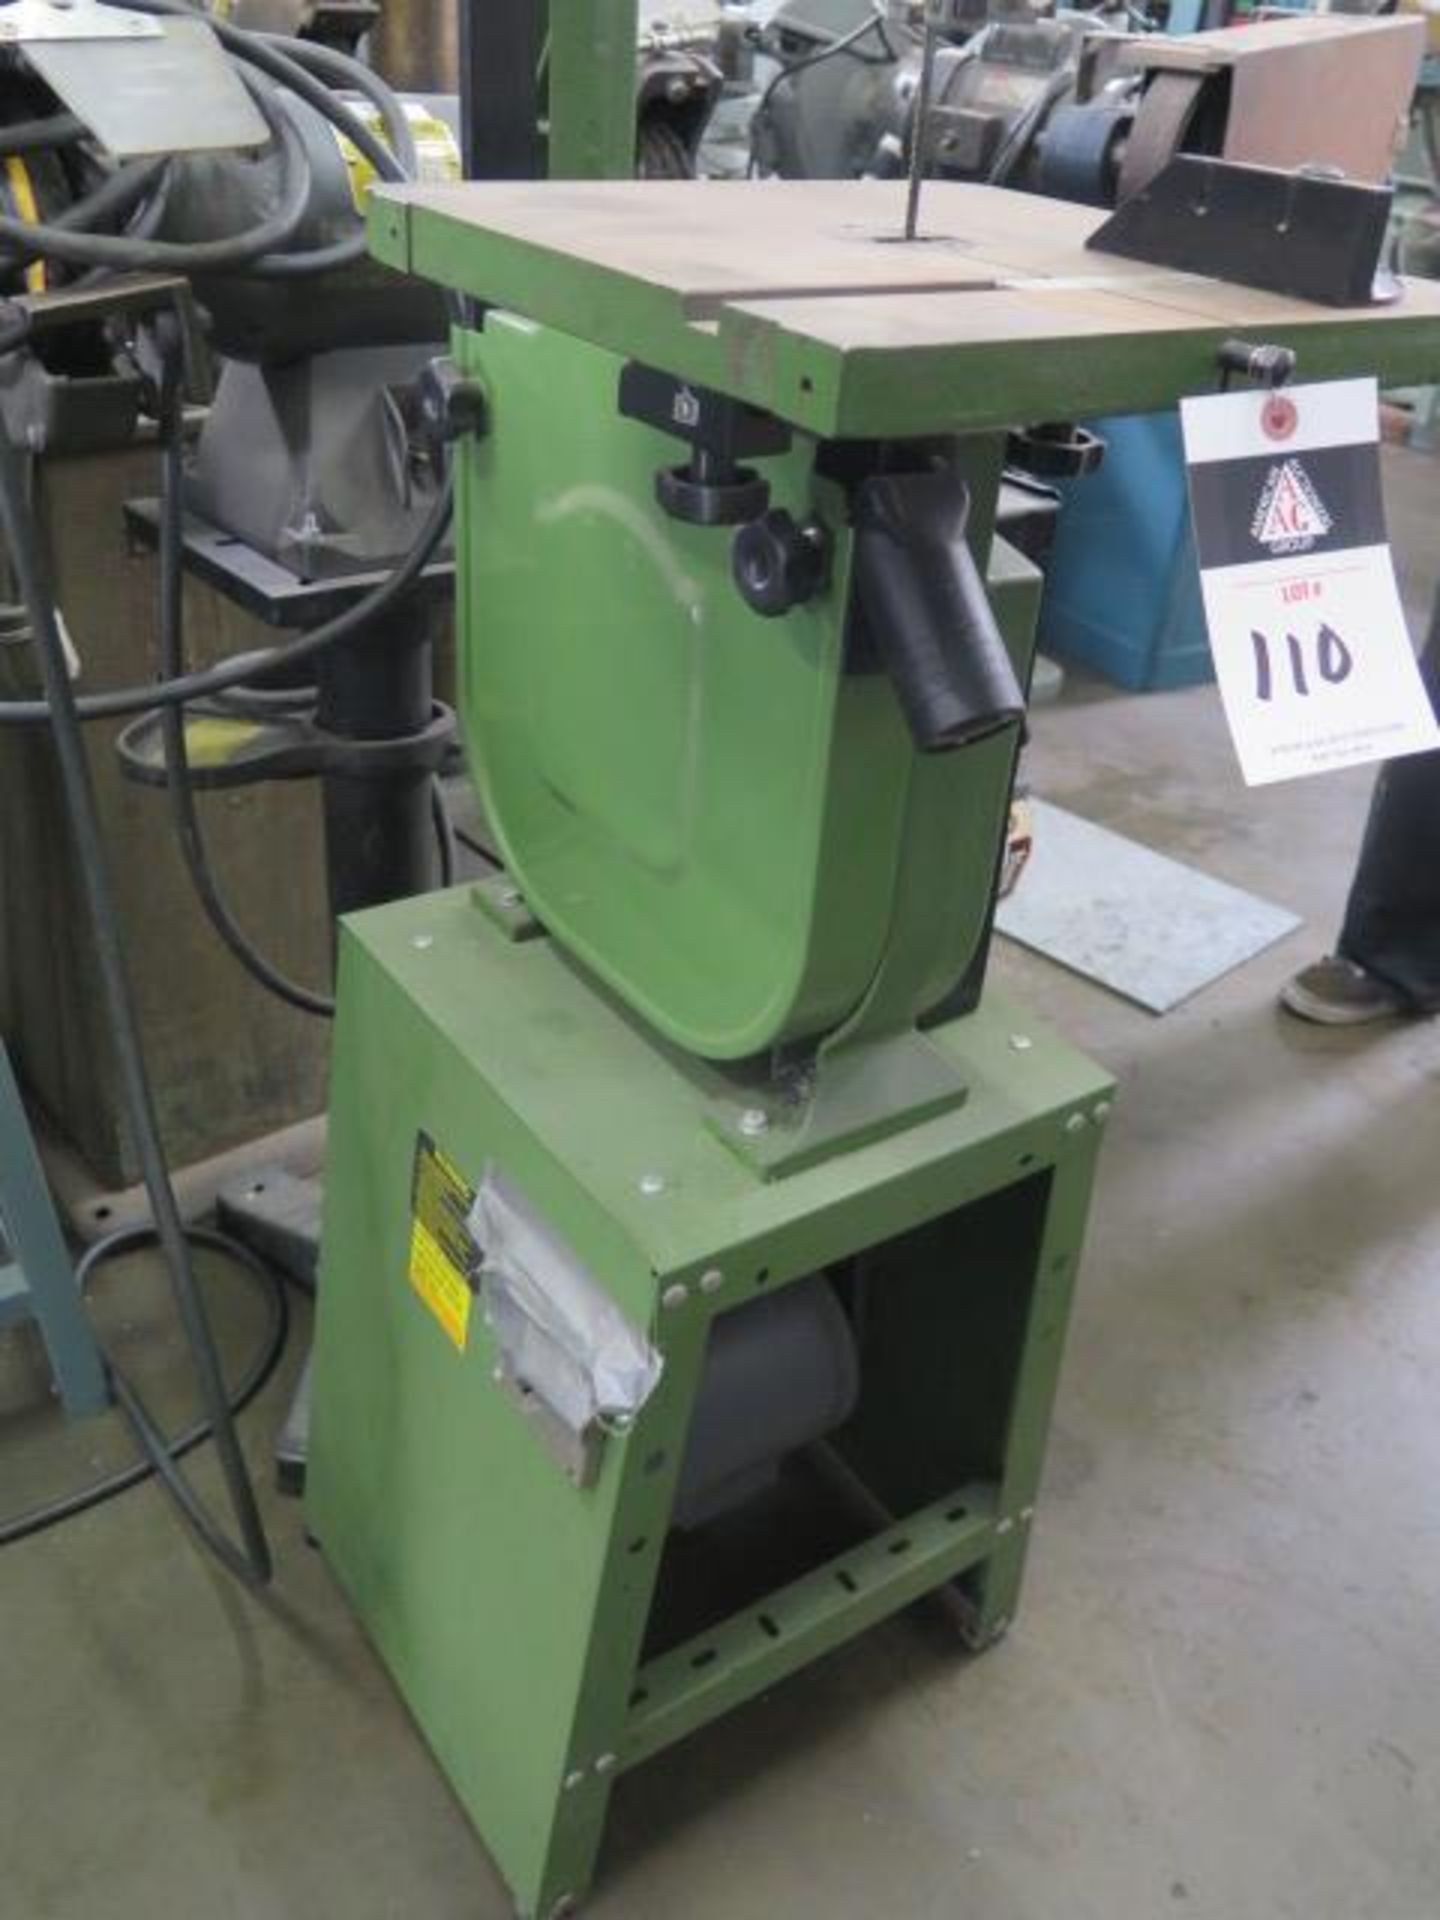 Central Machinery 14" Wood Cutting Vertical Band Saw w/ Stand (SOLD AS-IS - NO WARRANTY) - Image 3 of 5